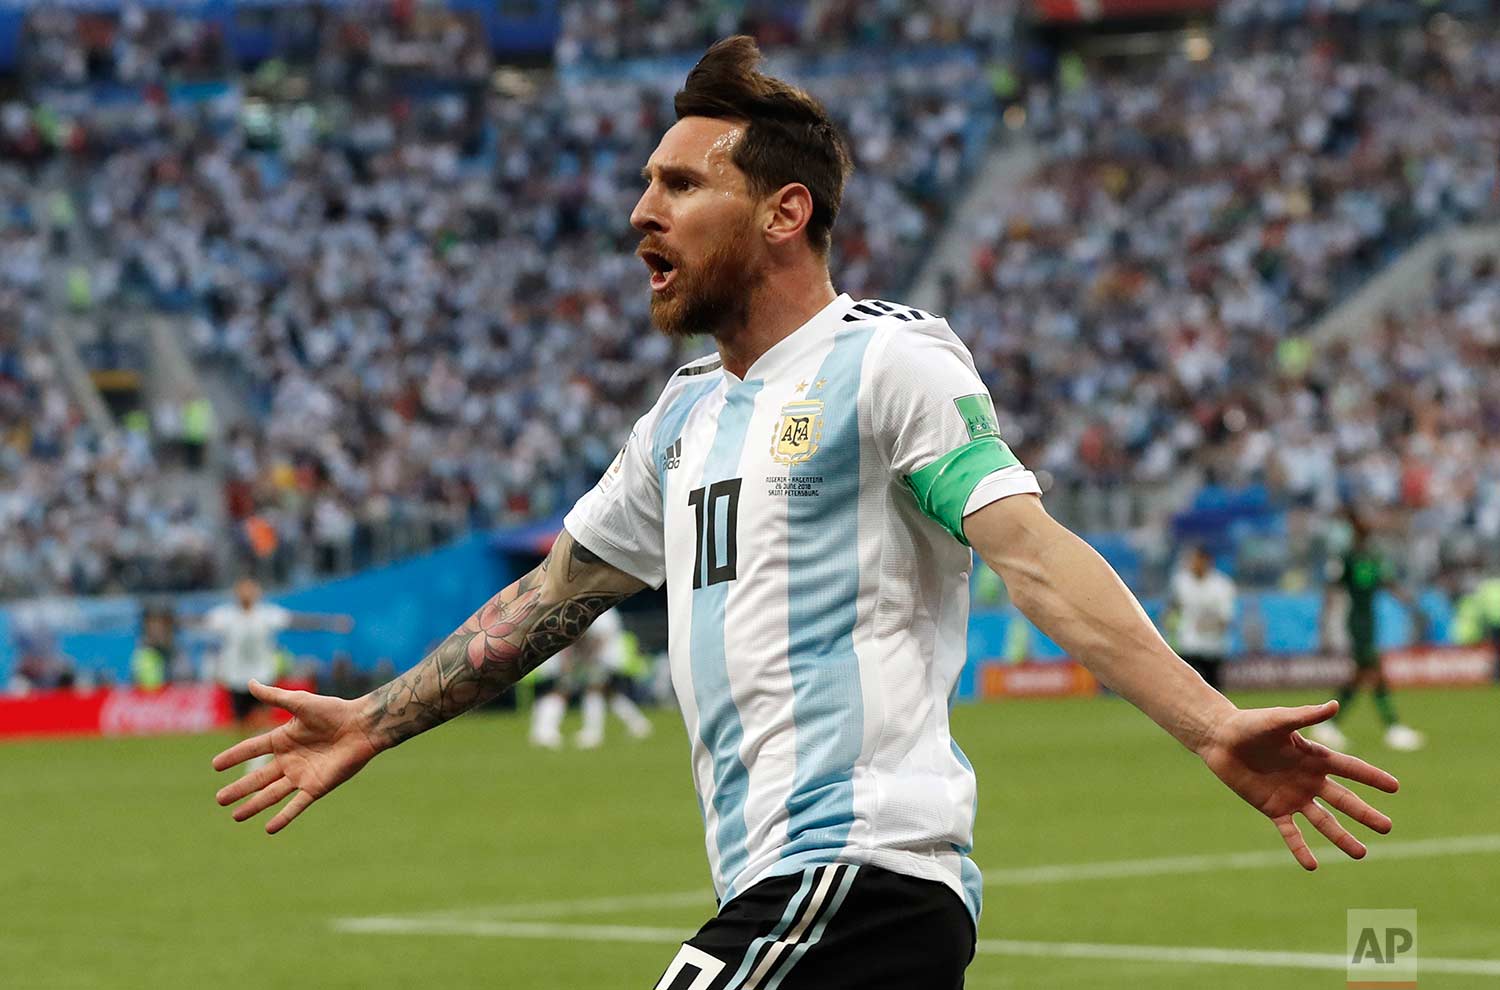  Argentina's Lionel Messi celebrates after scoring the opening goal of his team during the group D match between Argentina and Nigeria, at the 2018 soccer World Cup in the St. Petersburg Stadium in St. Petersburg, Russia, Tuesday, June 26, 2018. (AP 